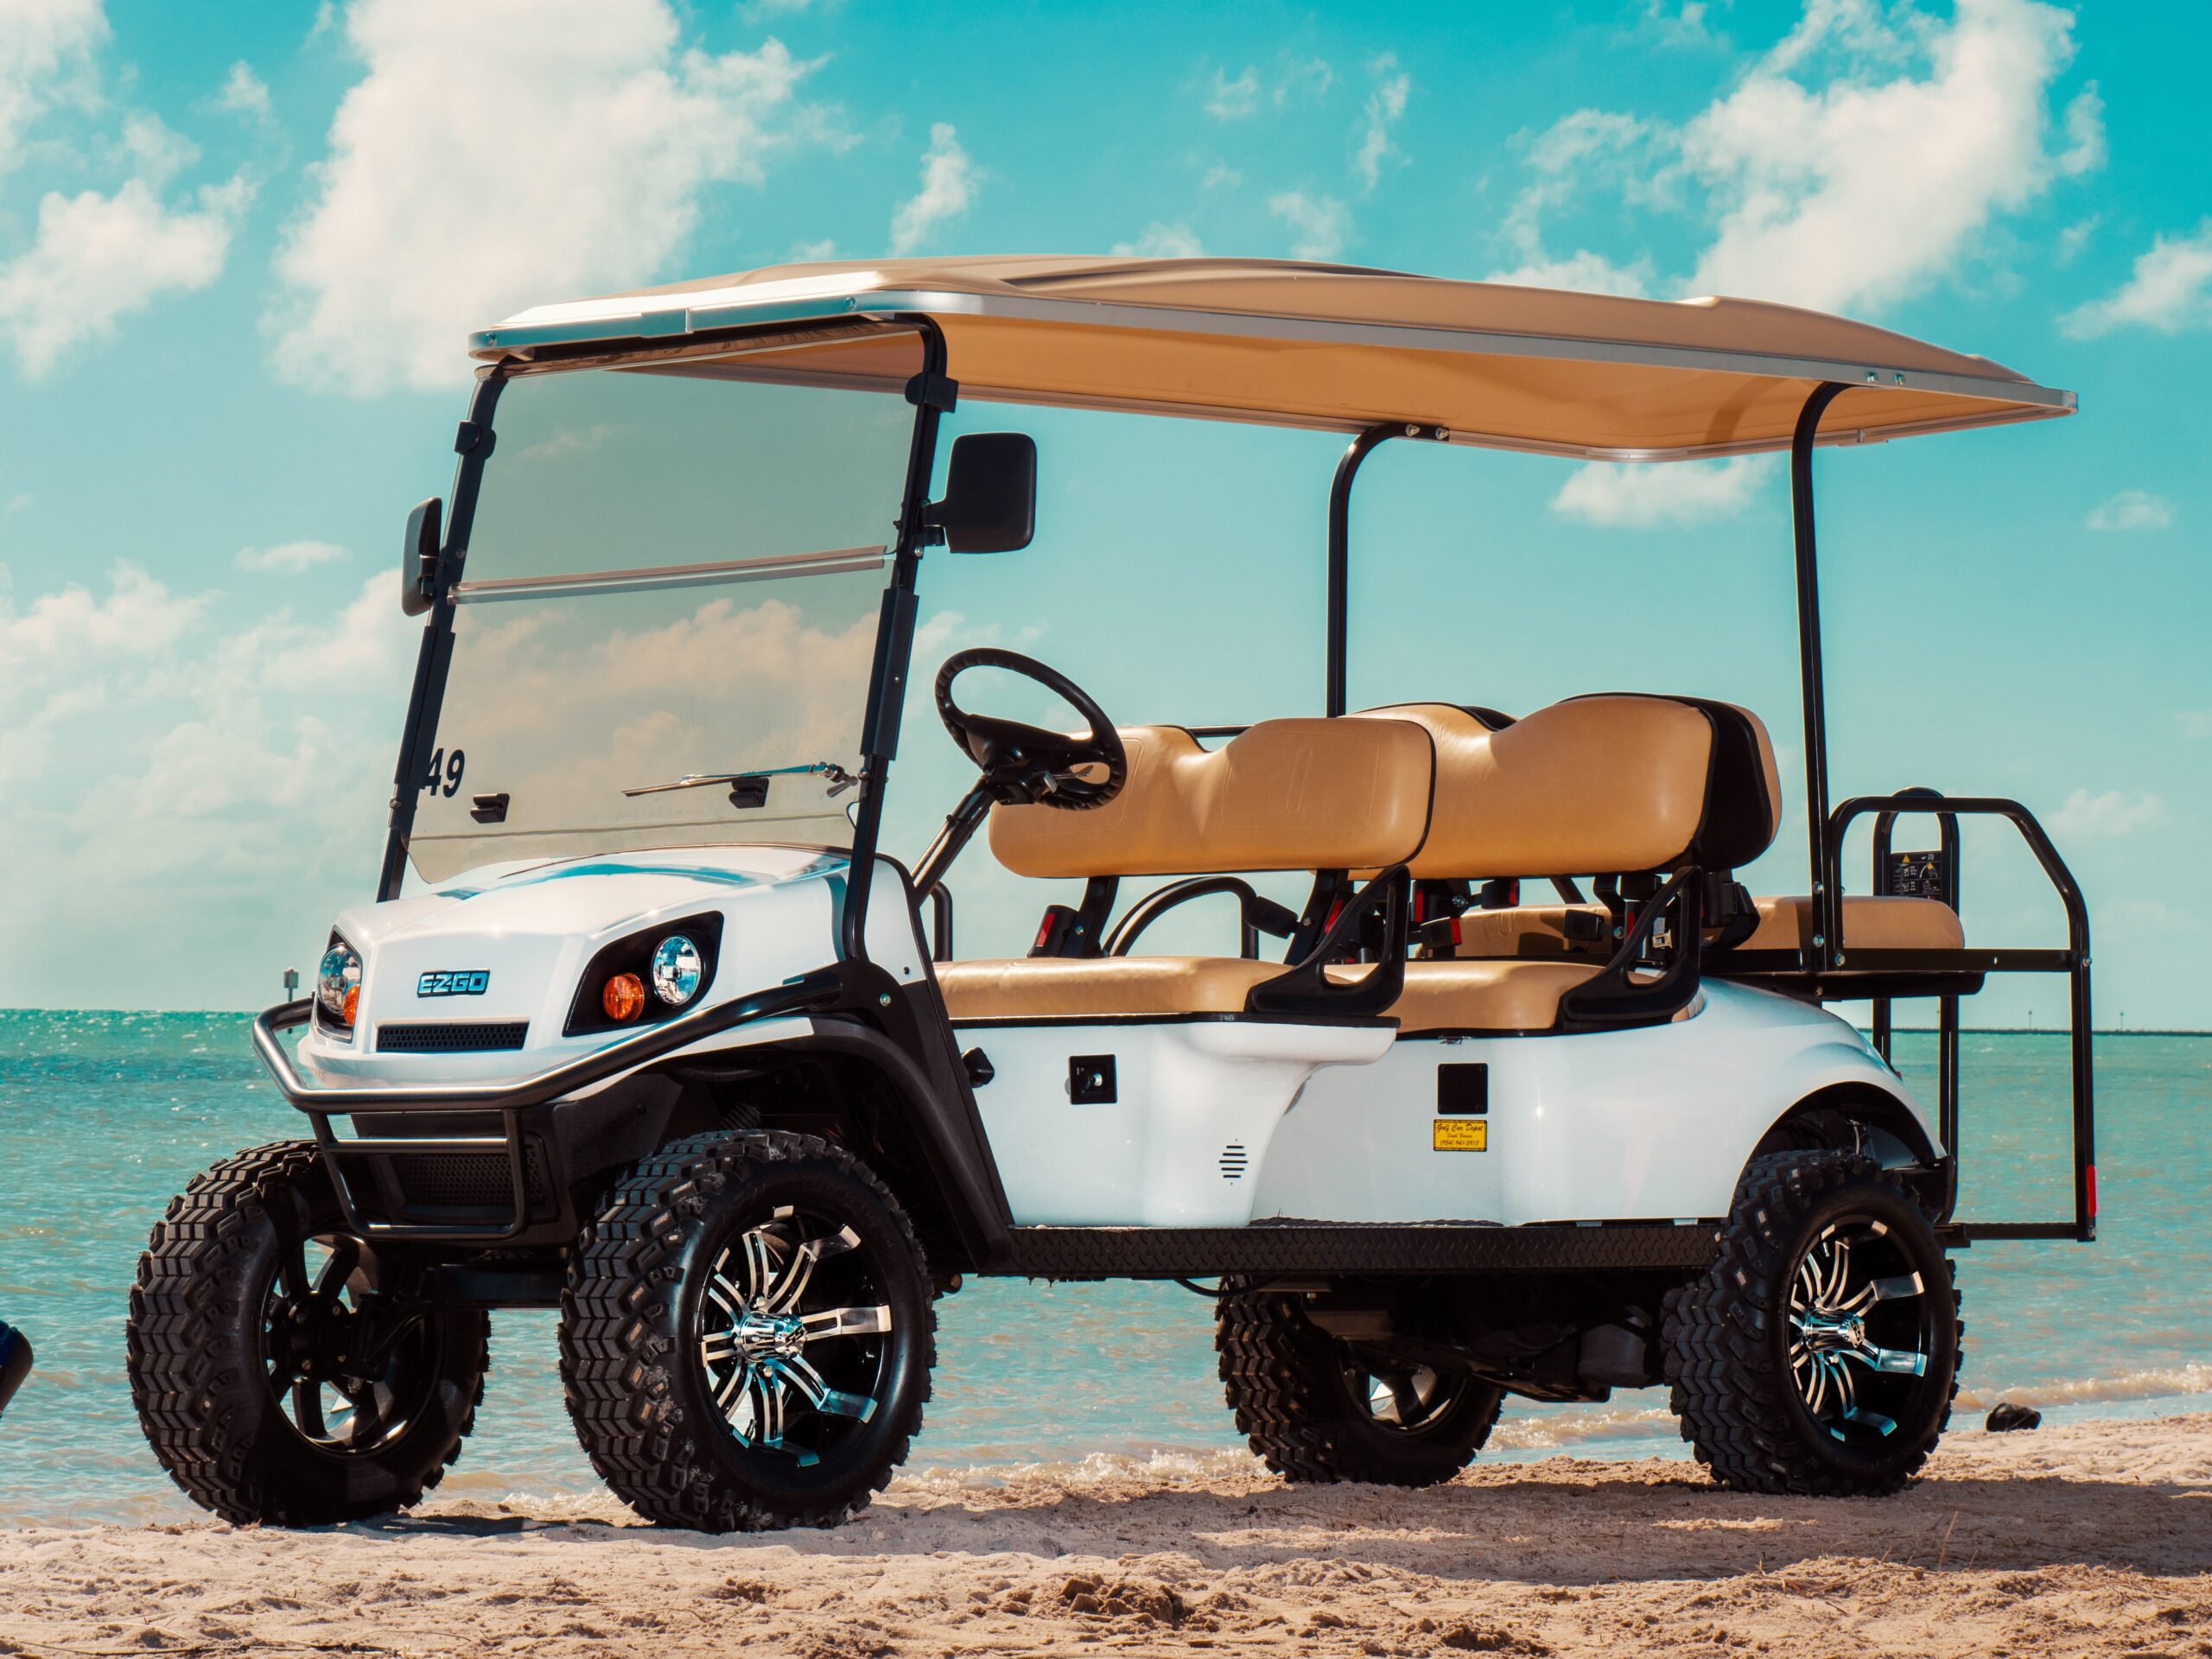 Key West 6 Seater Gas Powered Golf Cart Rental 2021 Attractions Key West